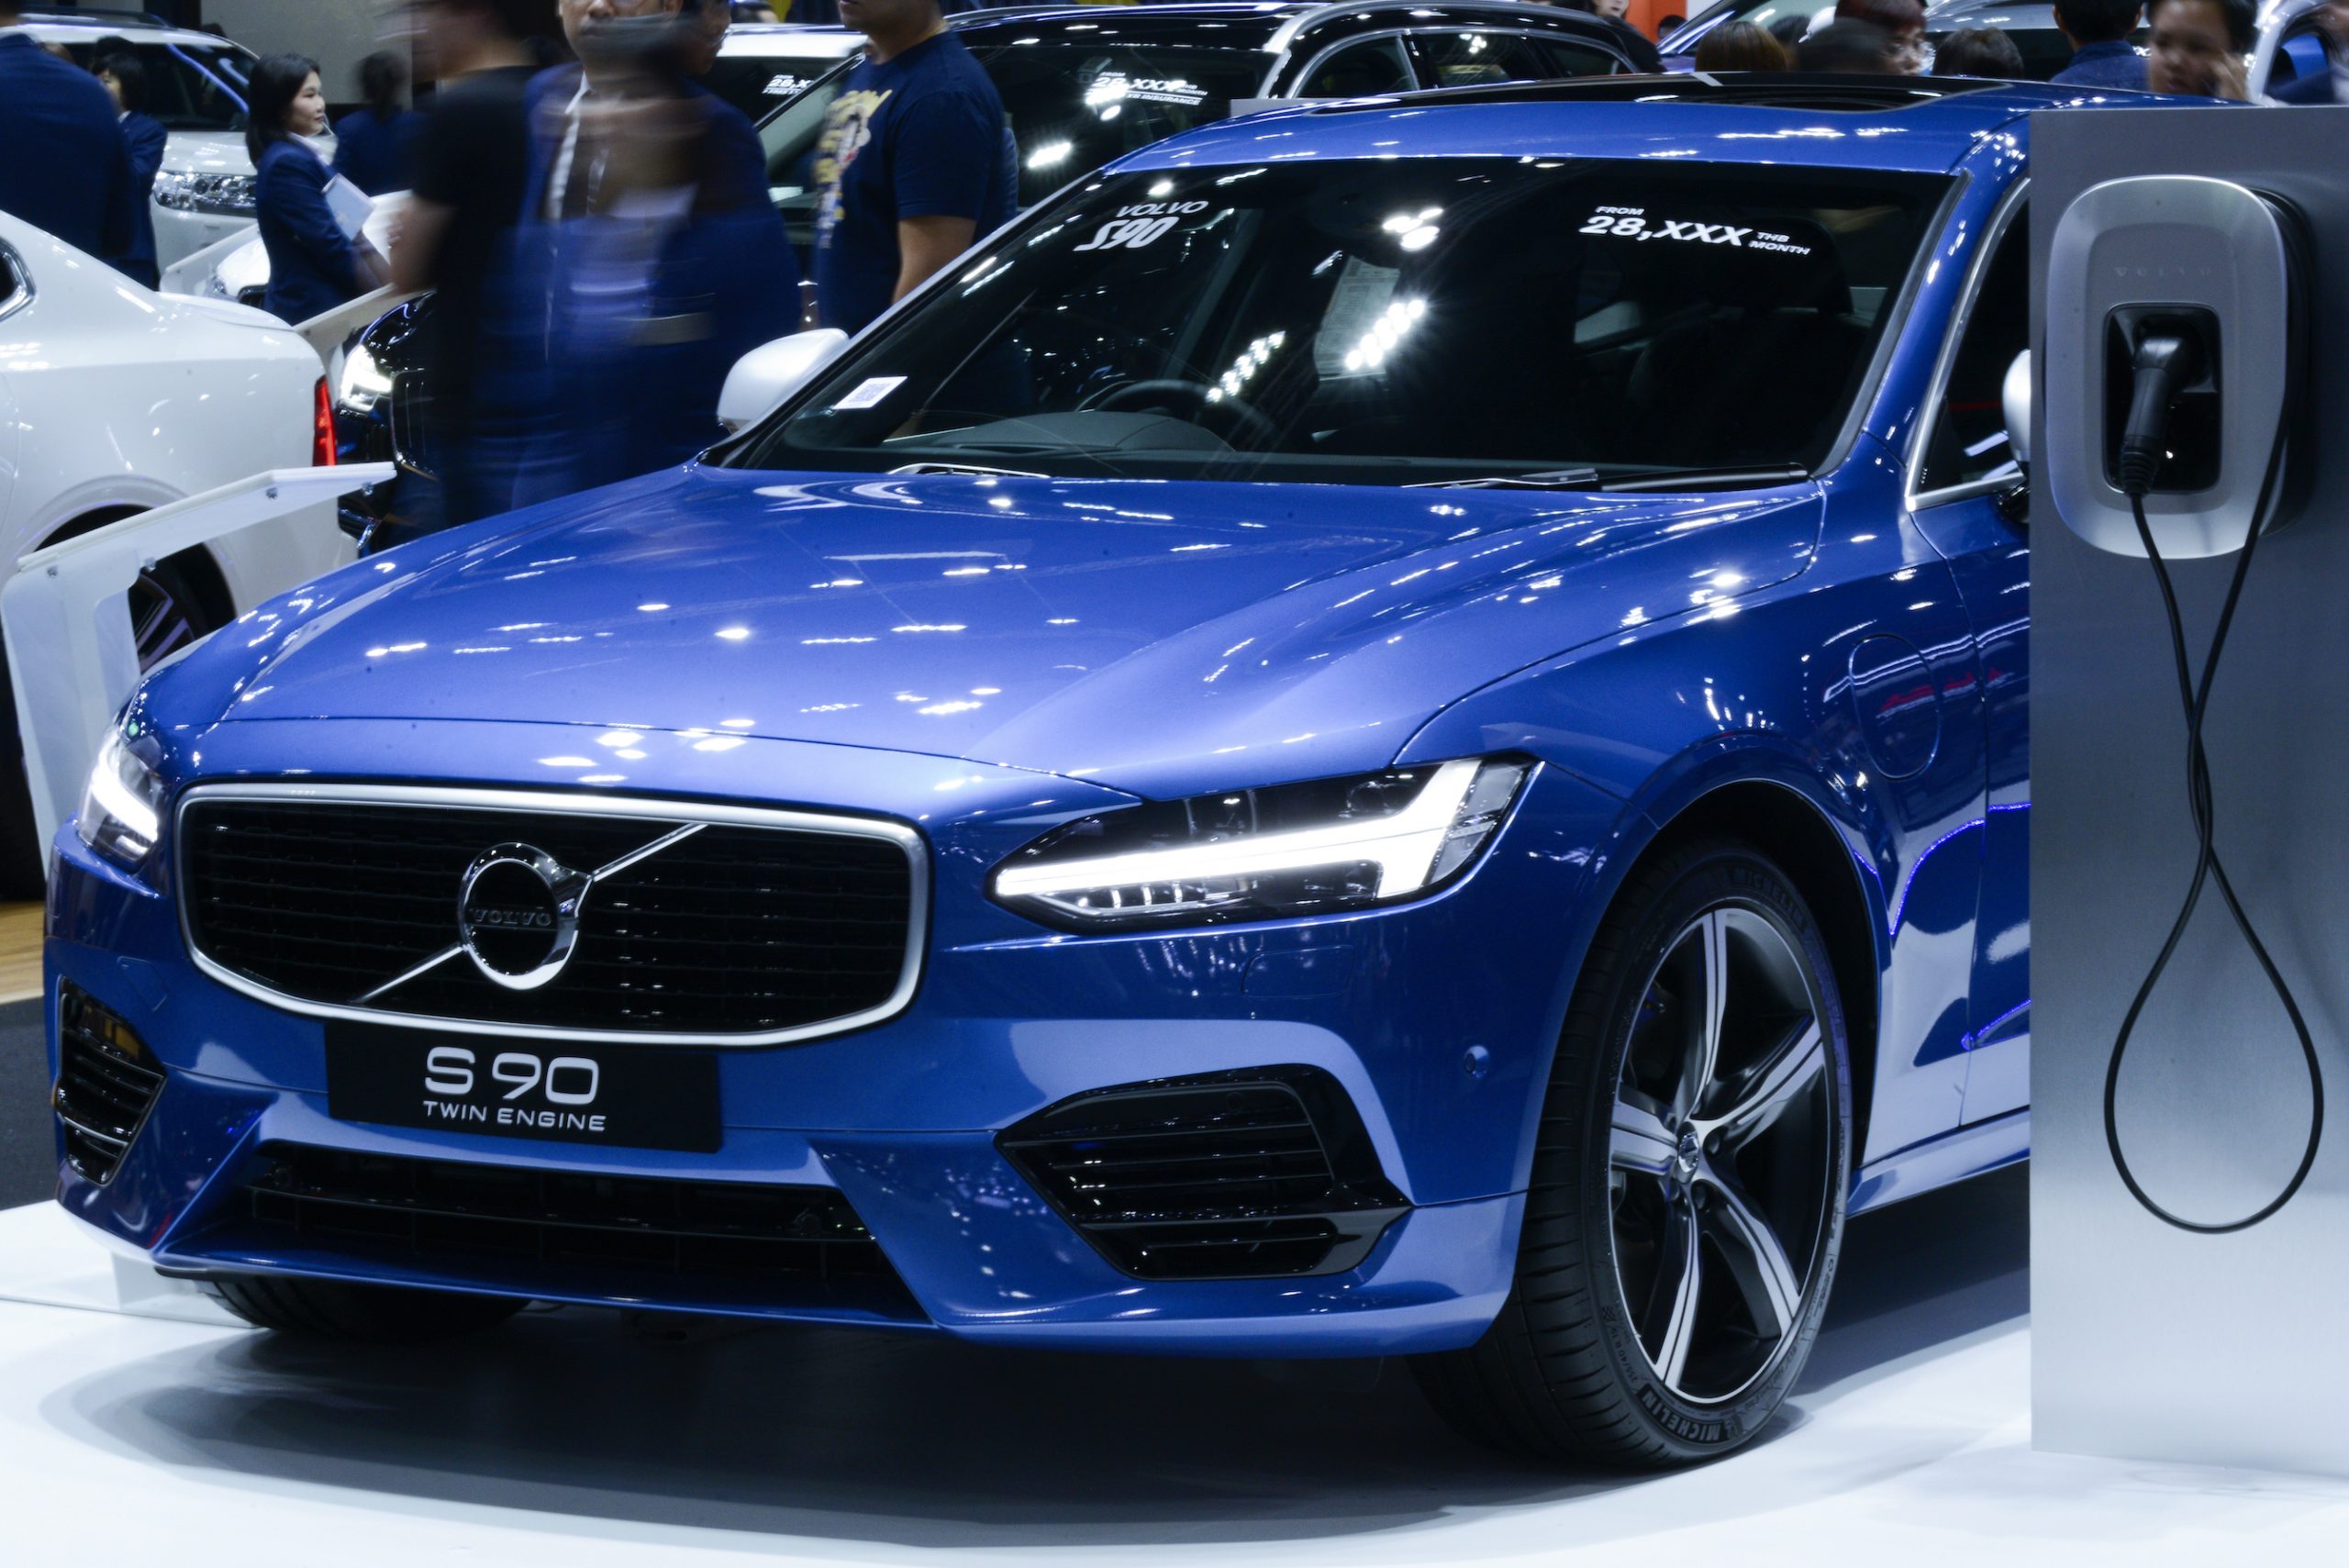 Volvo s90 T8 twin engine 2018 on display during Thailand International Motor Expo 2018